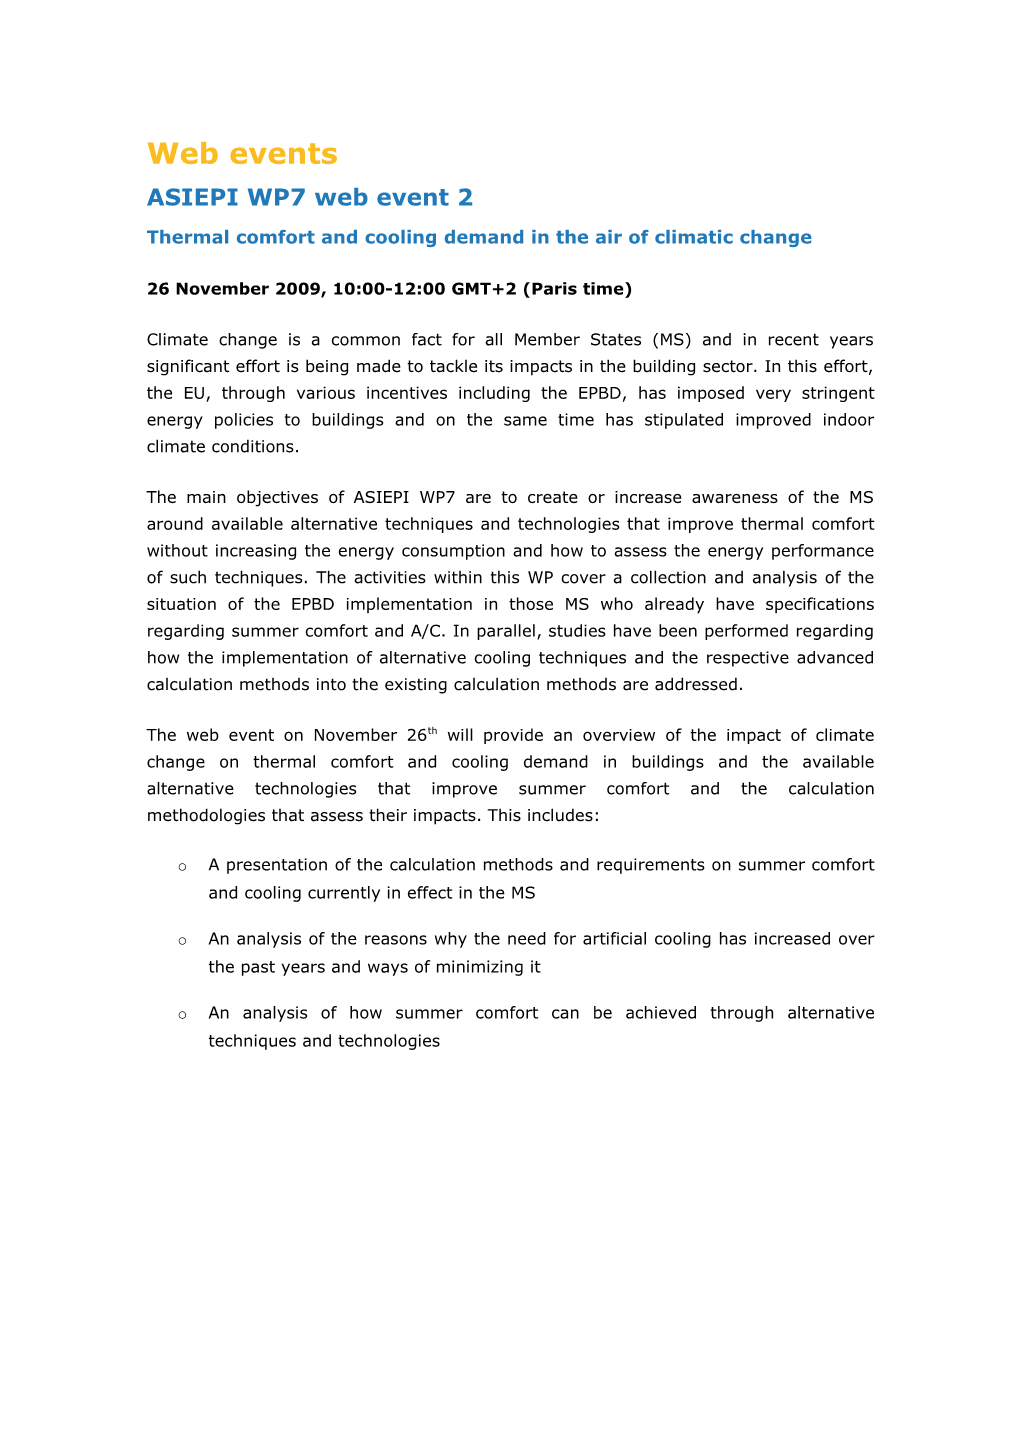 Thermal Comfort and Cooling Demand in the Air of Climatic Change